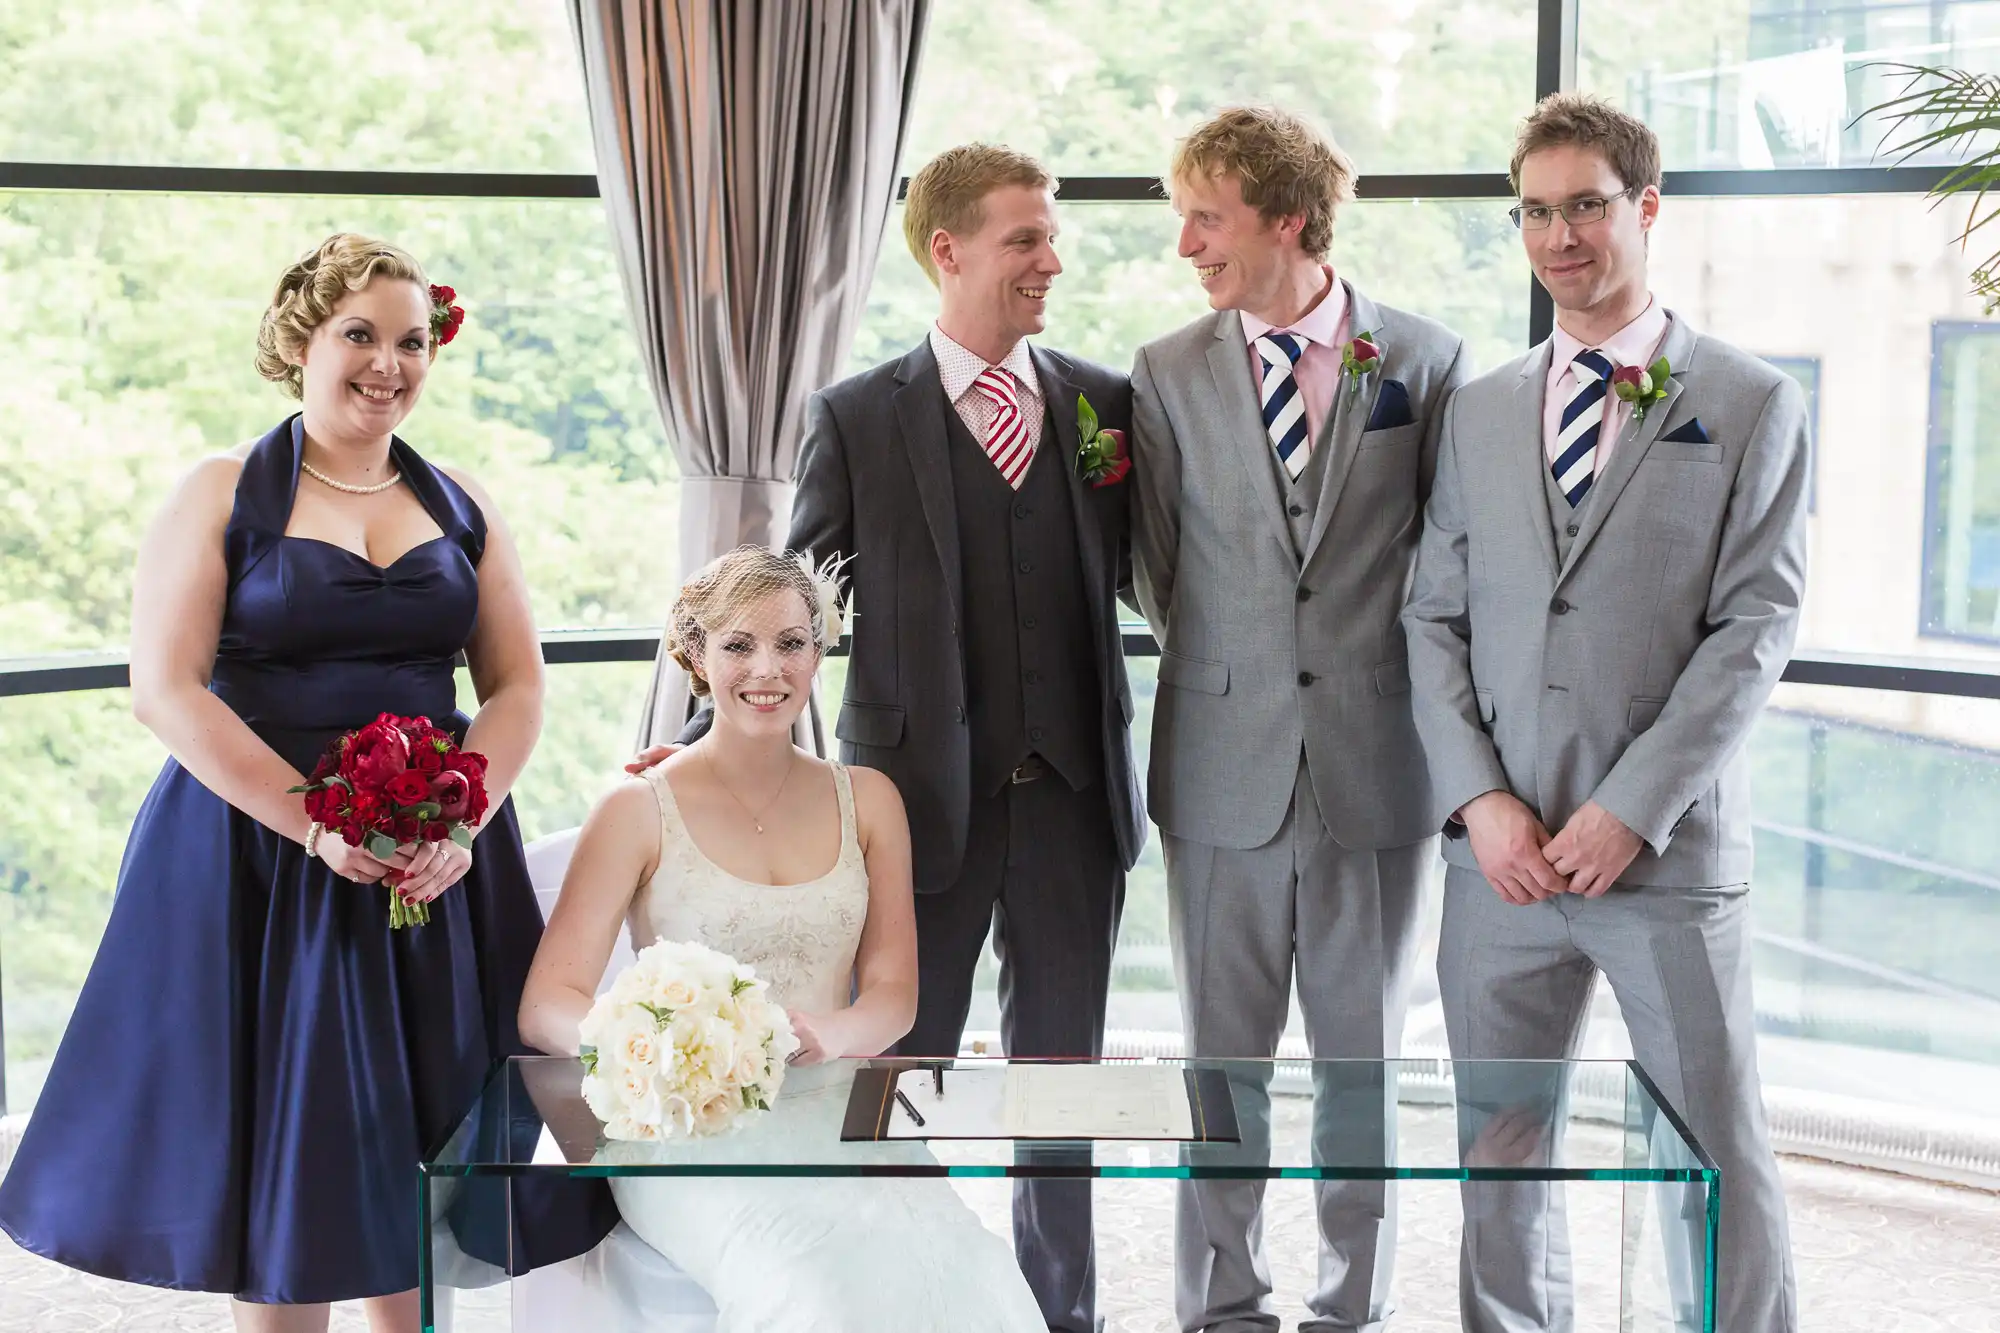 A wedding group indoors with a bride sitting and four others standing, smiling; three men in suits and a woman in a blue dress.